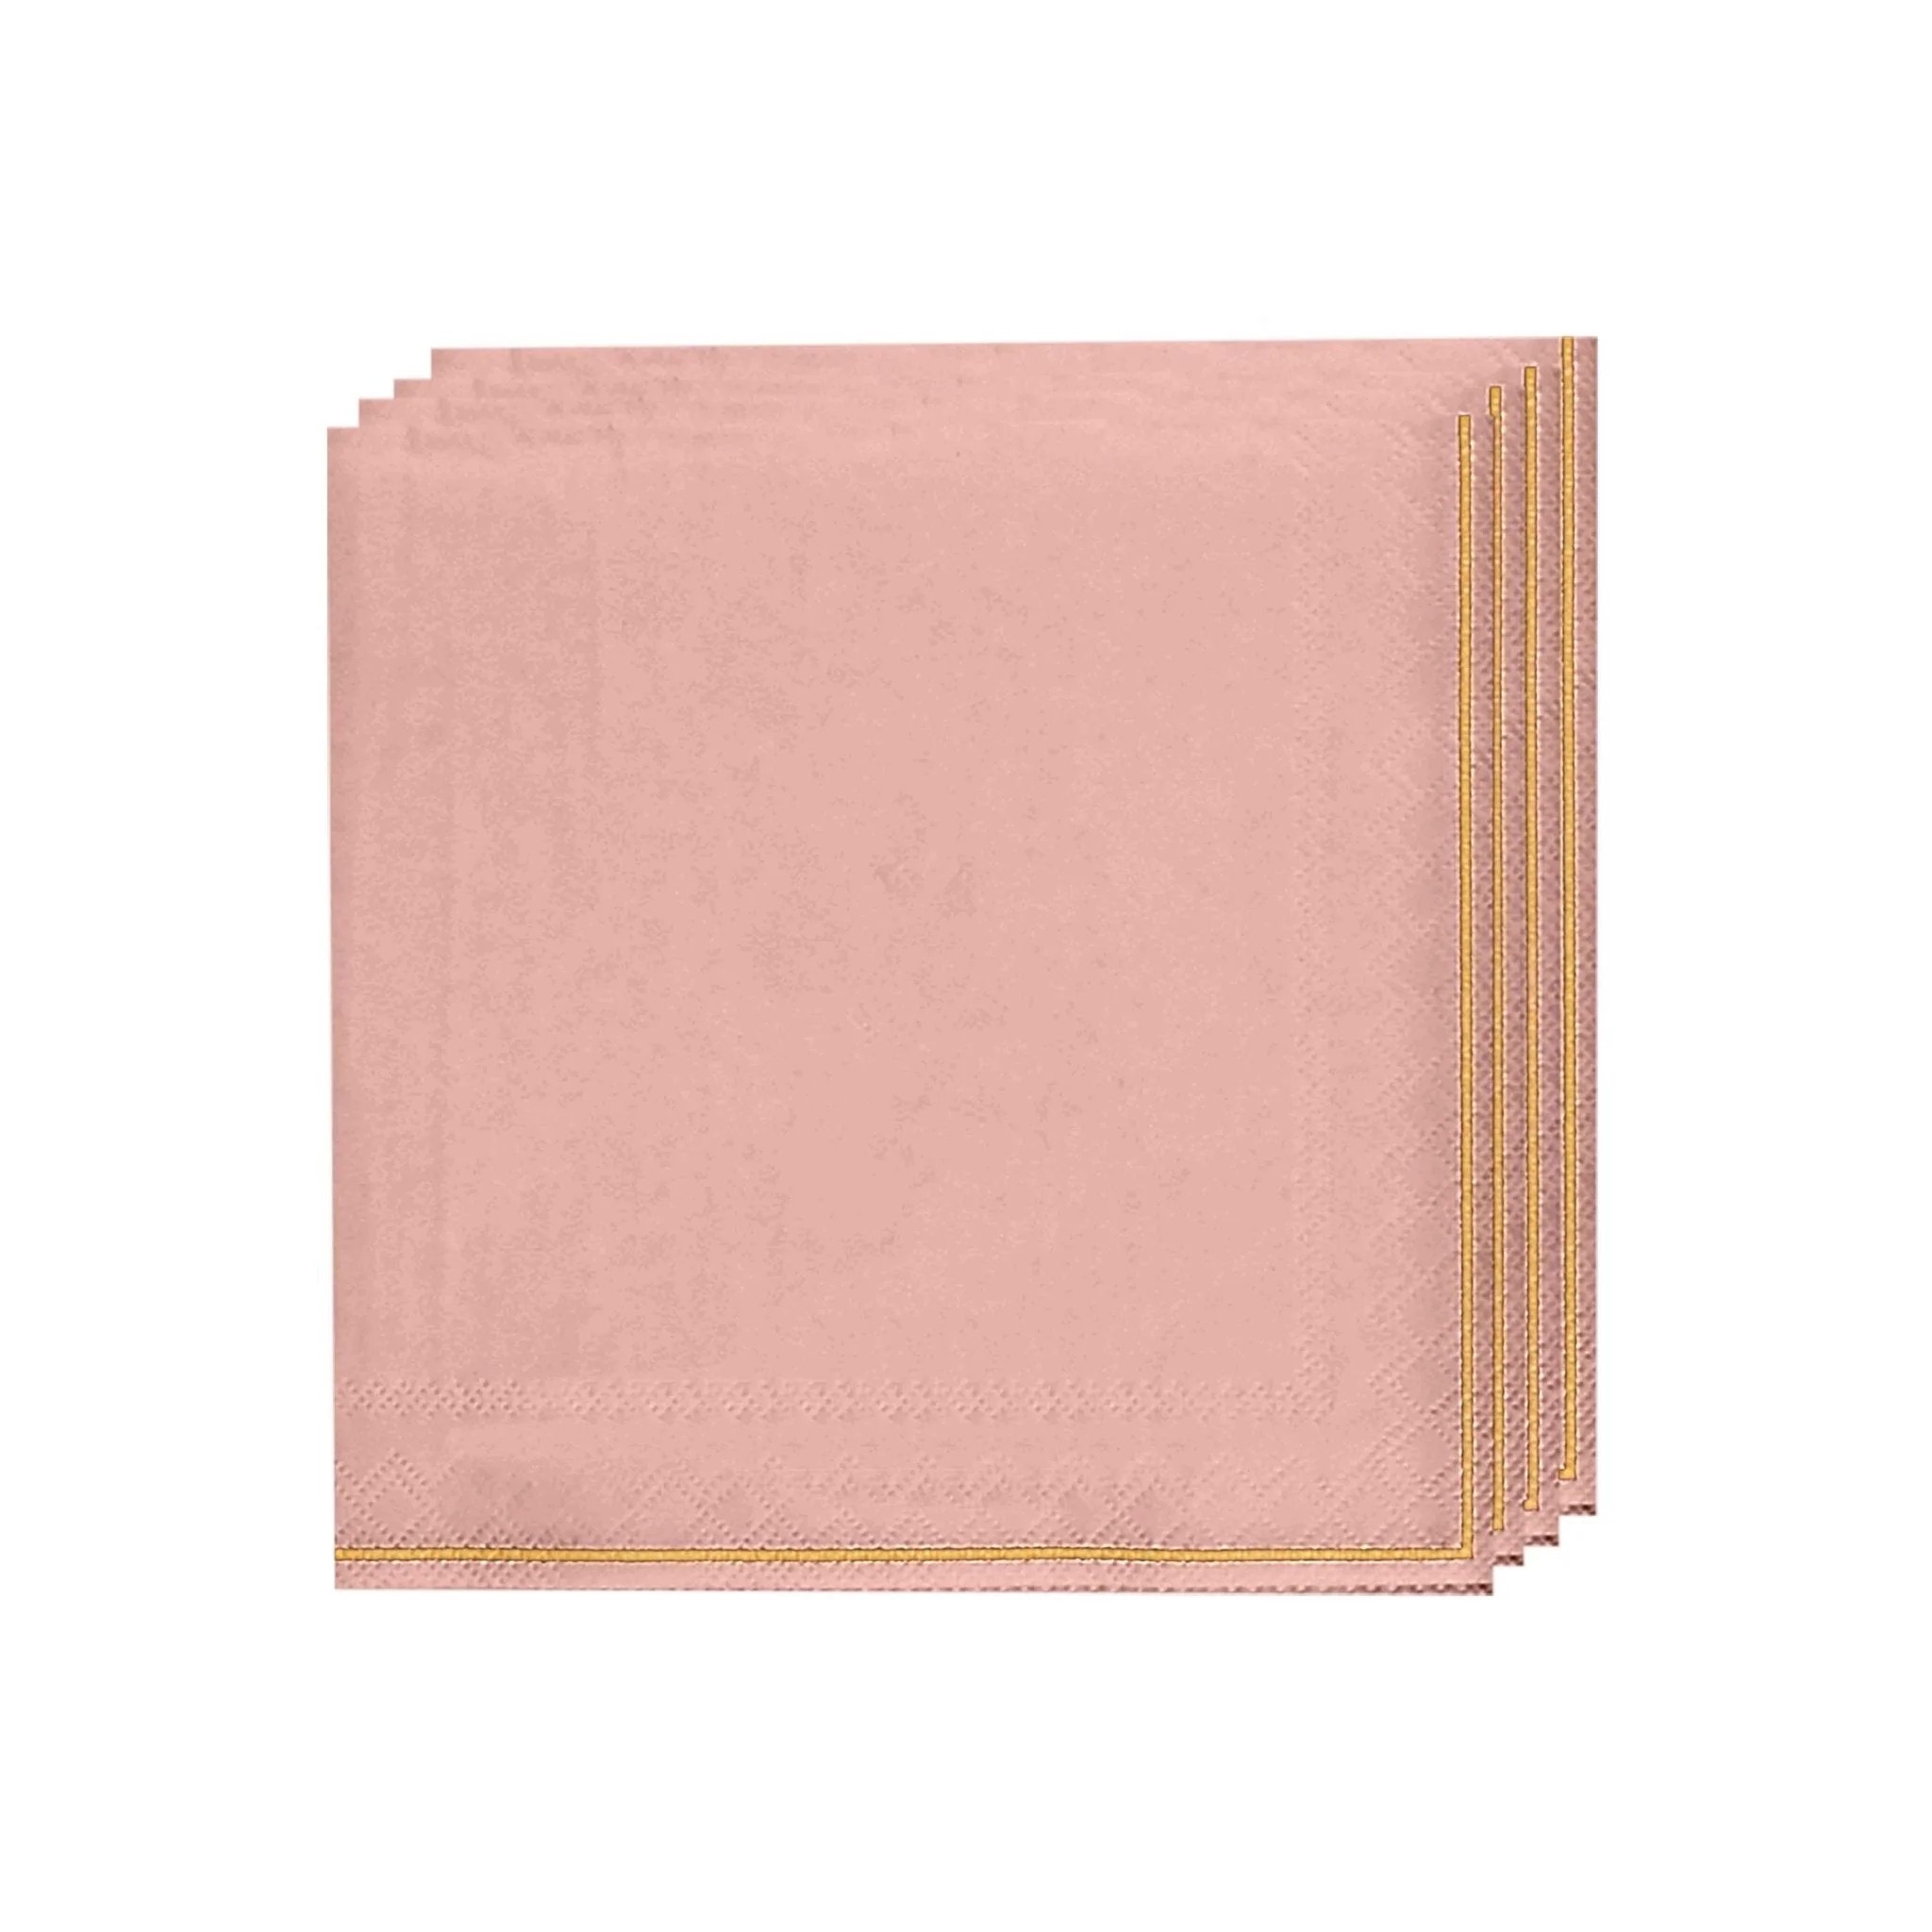 Luxe Party Coral with Gold Stripe Lunch Napkins - 20 pcs